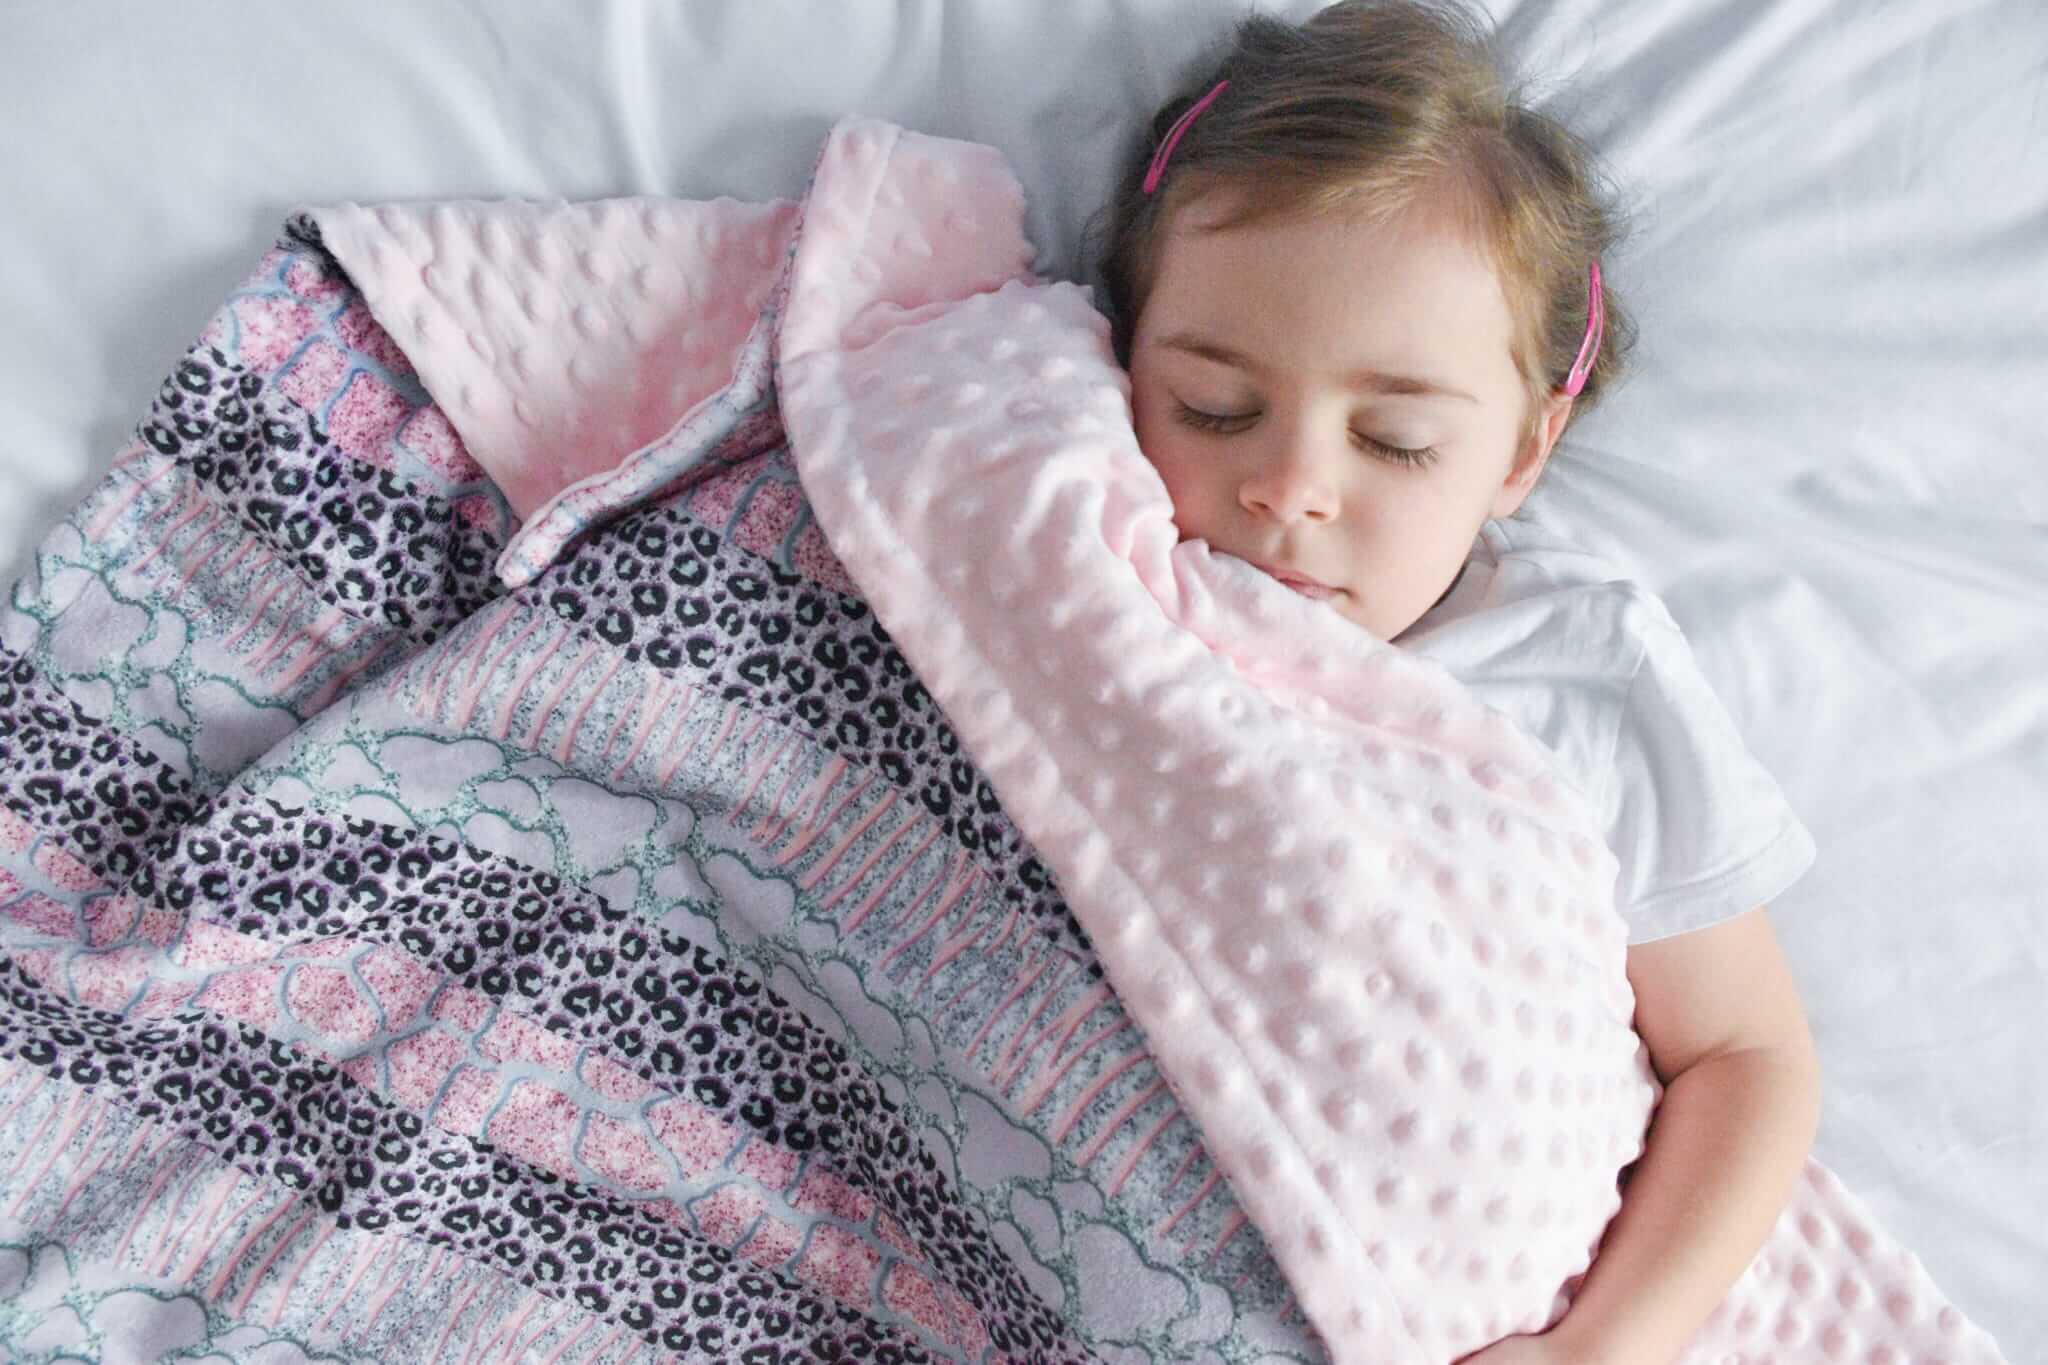 Blanket Introducing our ultra-soft and snuggly Blankets. With a super cozy double layer design, these blankets feature a printed minky fabric on one side and a minky dot fabric on the other. Choose from 7 solid minky dot options to fit your style. Choose